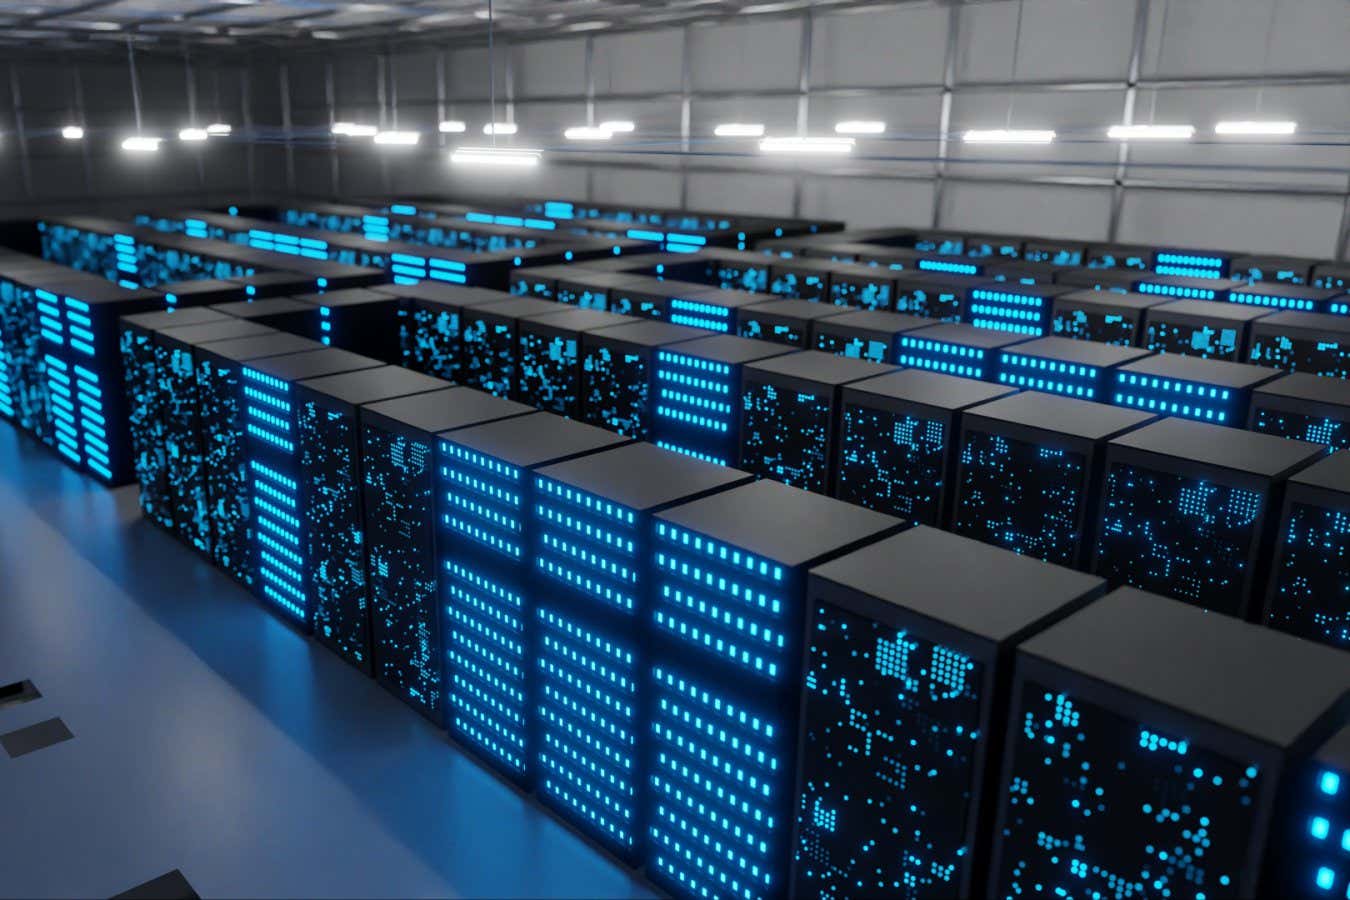 Electricity demand from data centres set to double by 2026